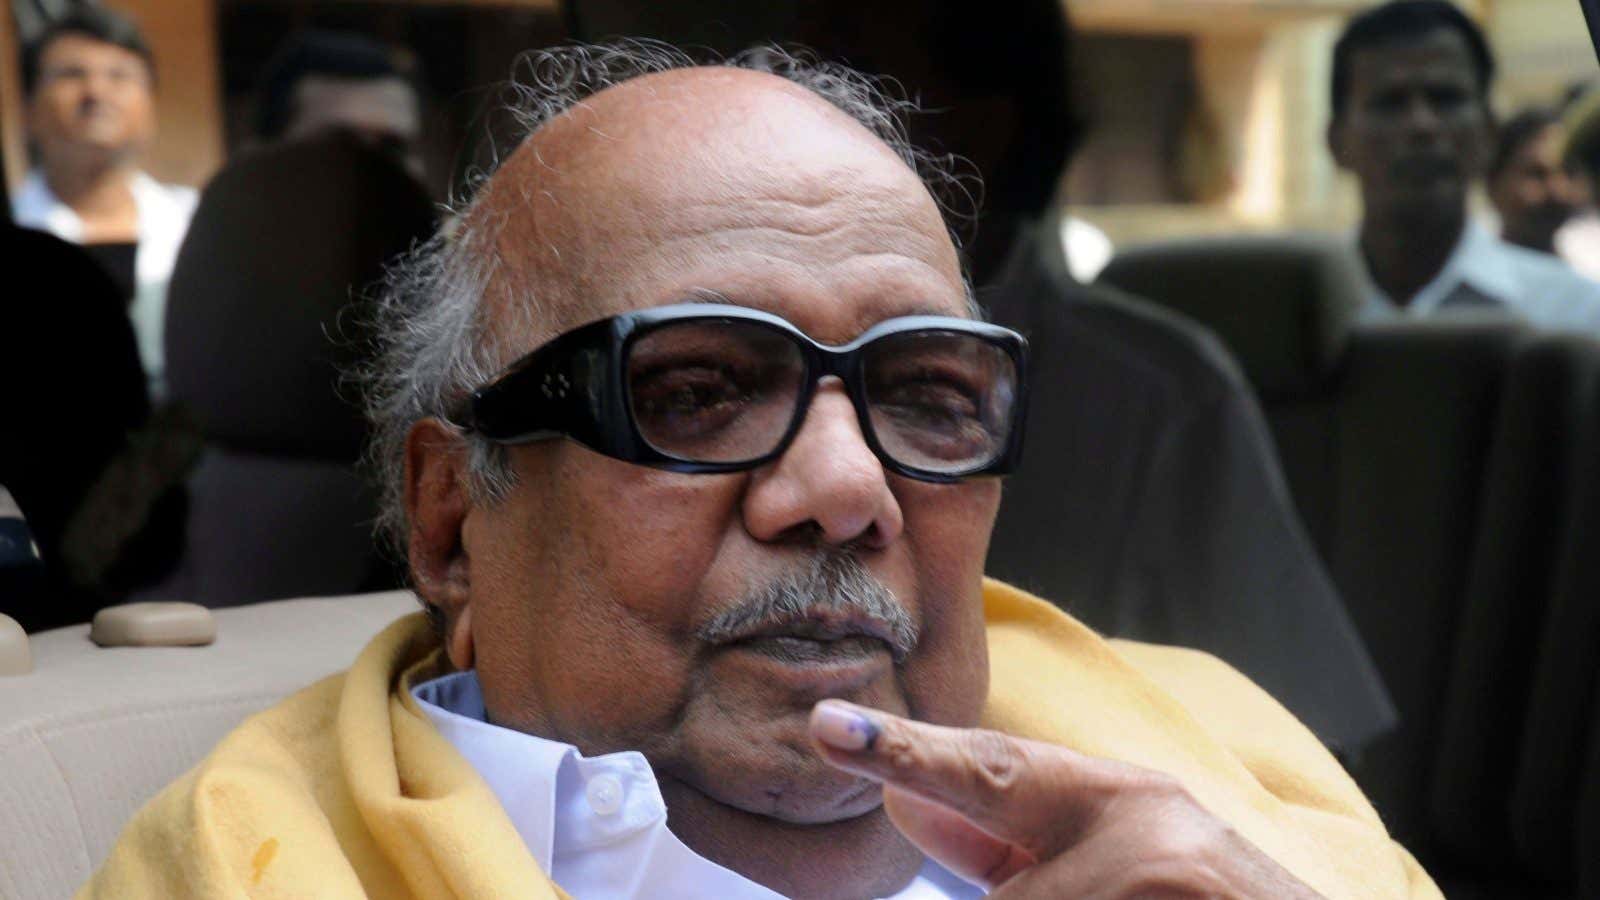 Tamil Nadu state Chief Minister M. Karunanidhi displays the indelible ink mark on his finger after casting his vote at a polling booth in Chennai,…